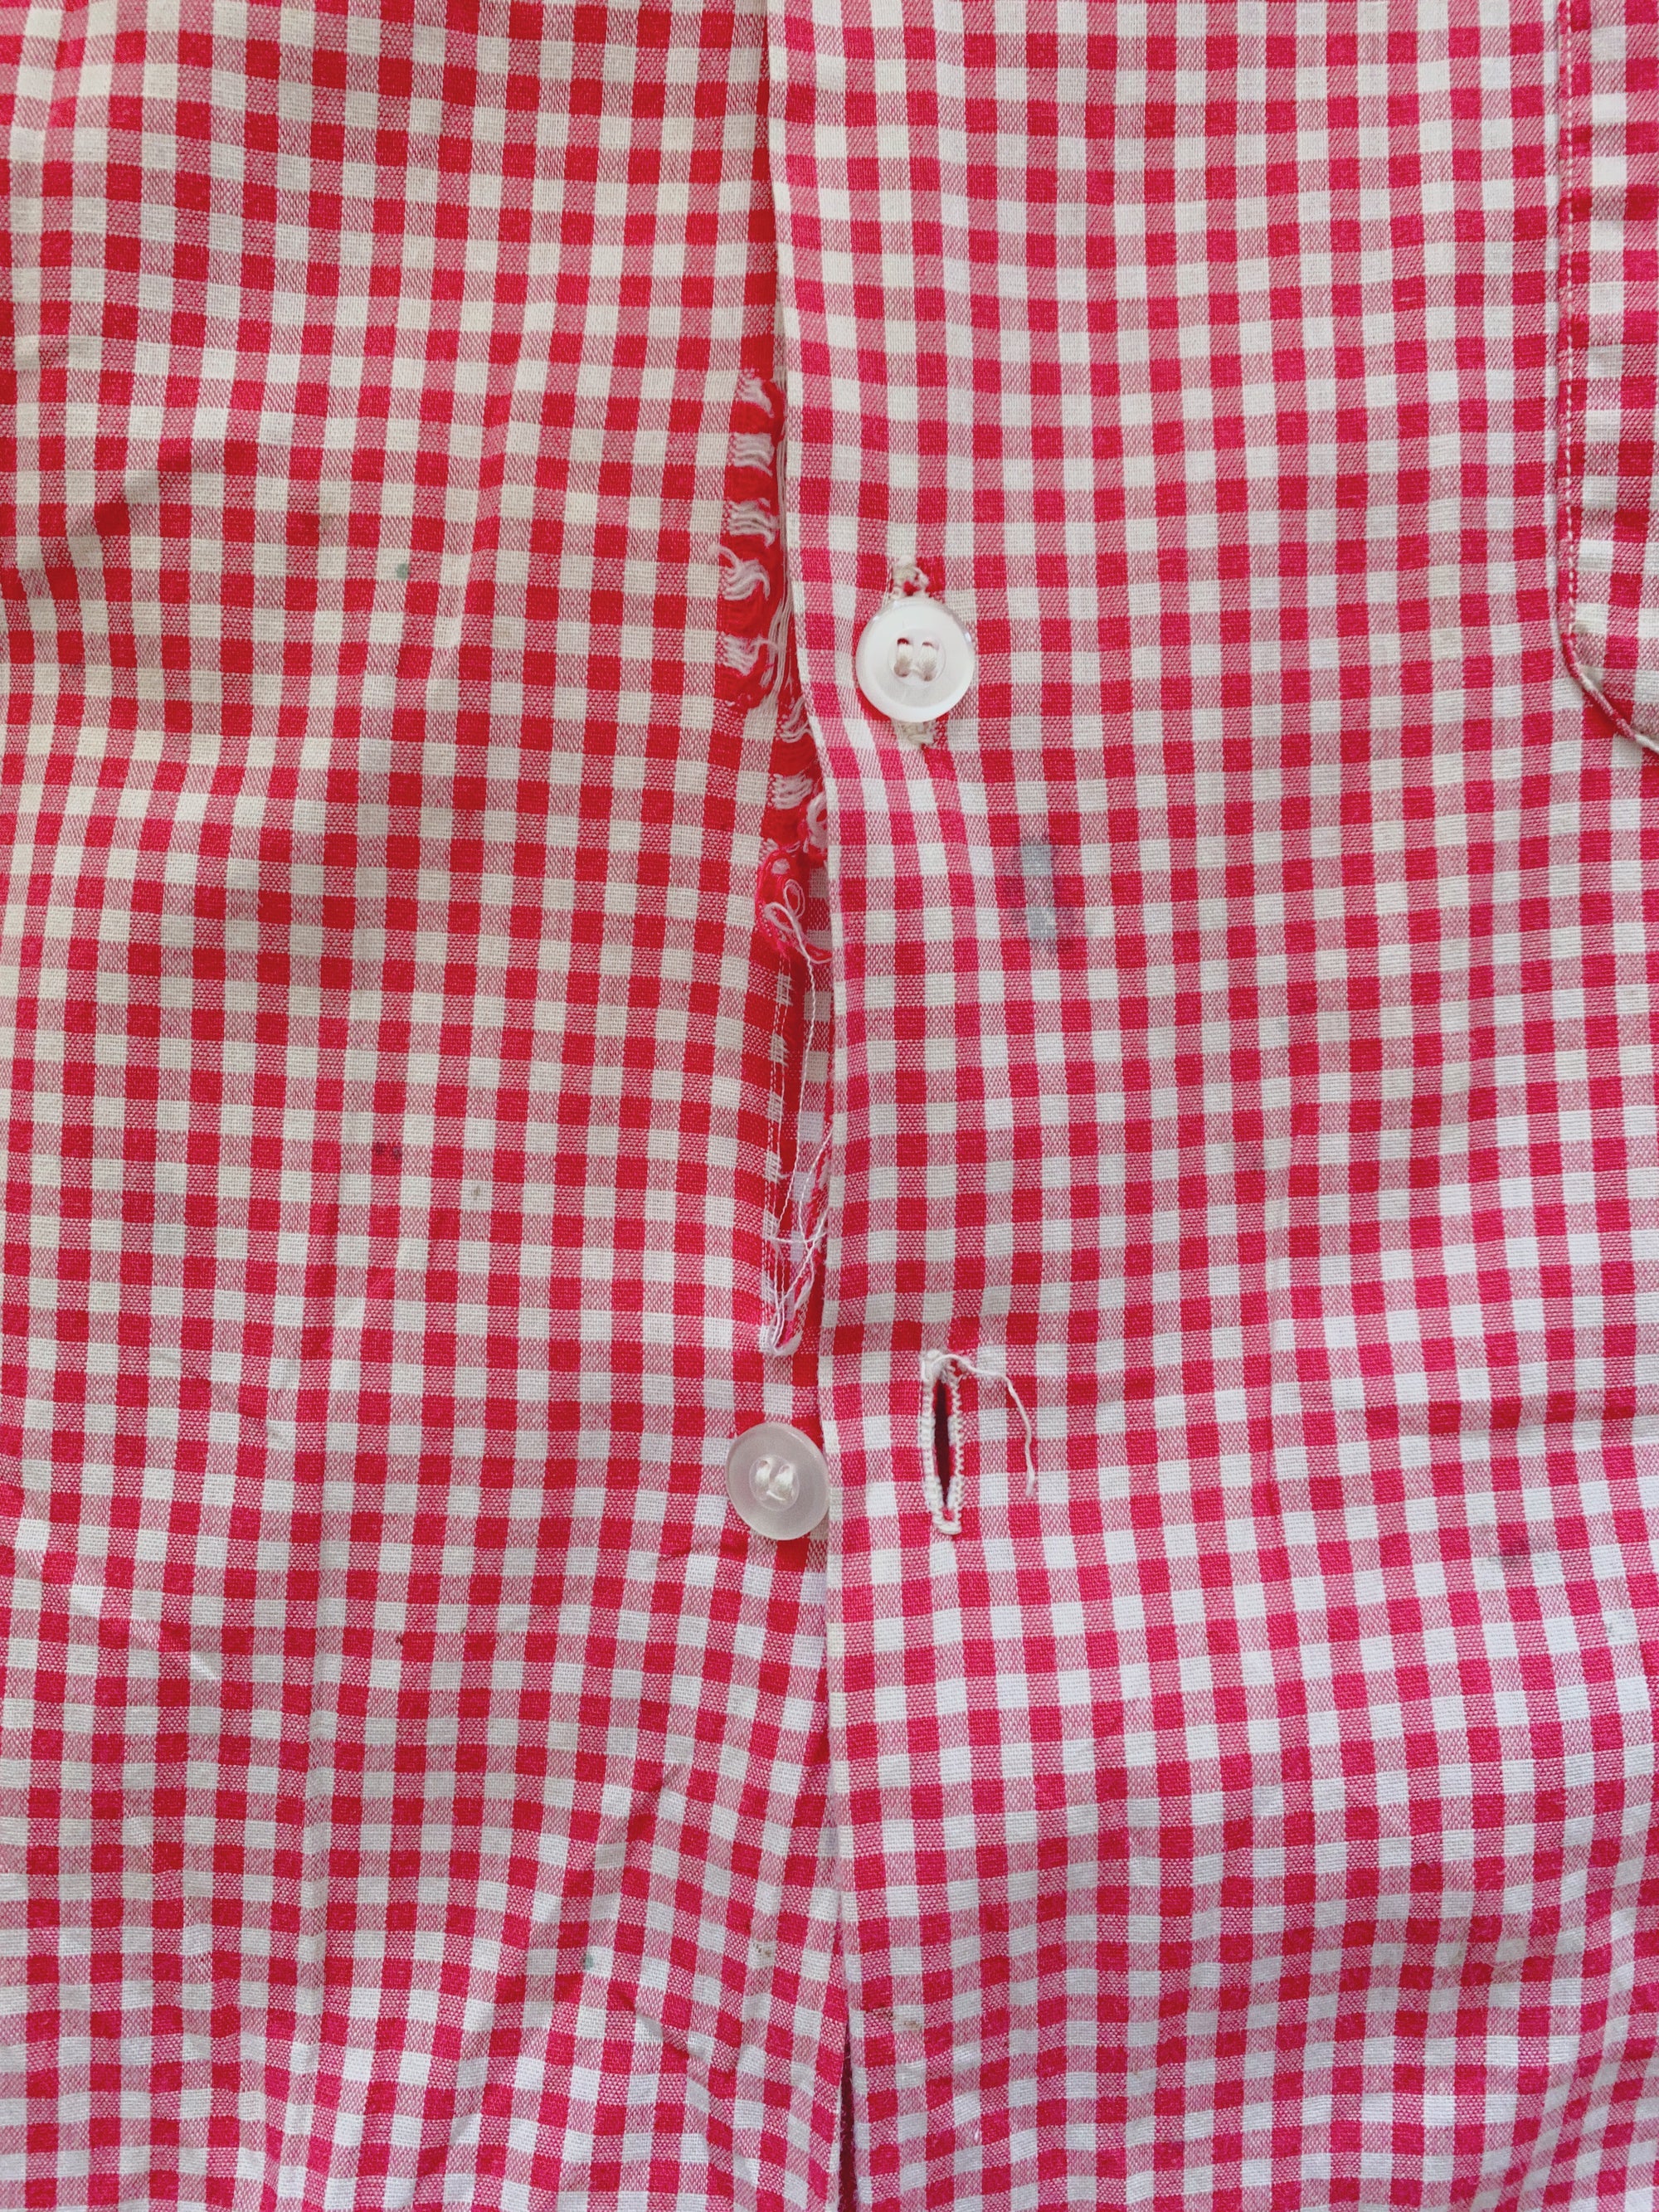 1960's Red Gingham Short Sleeve Button Down